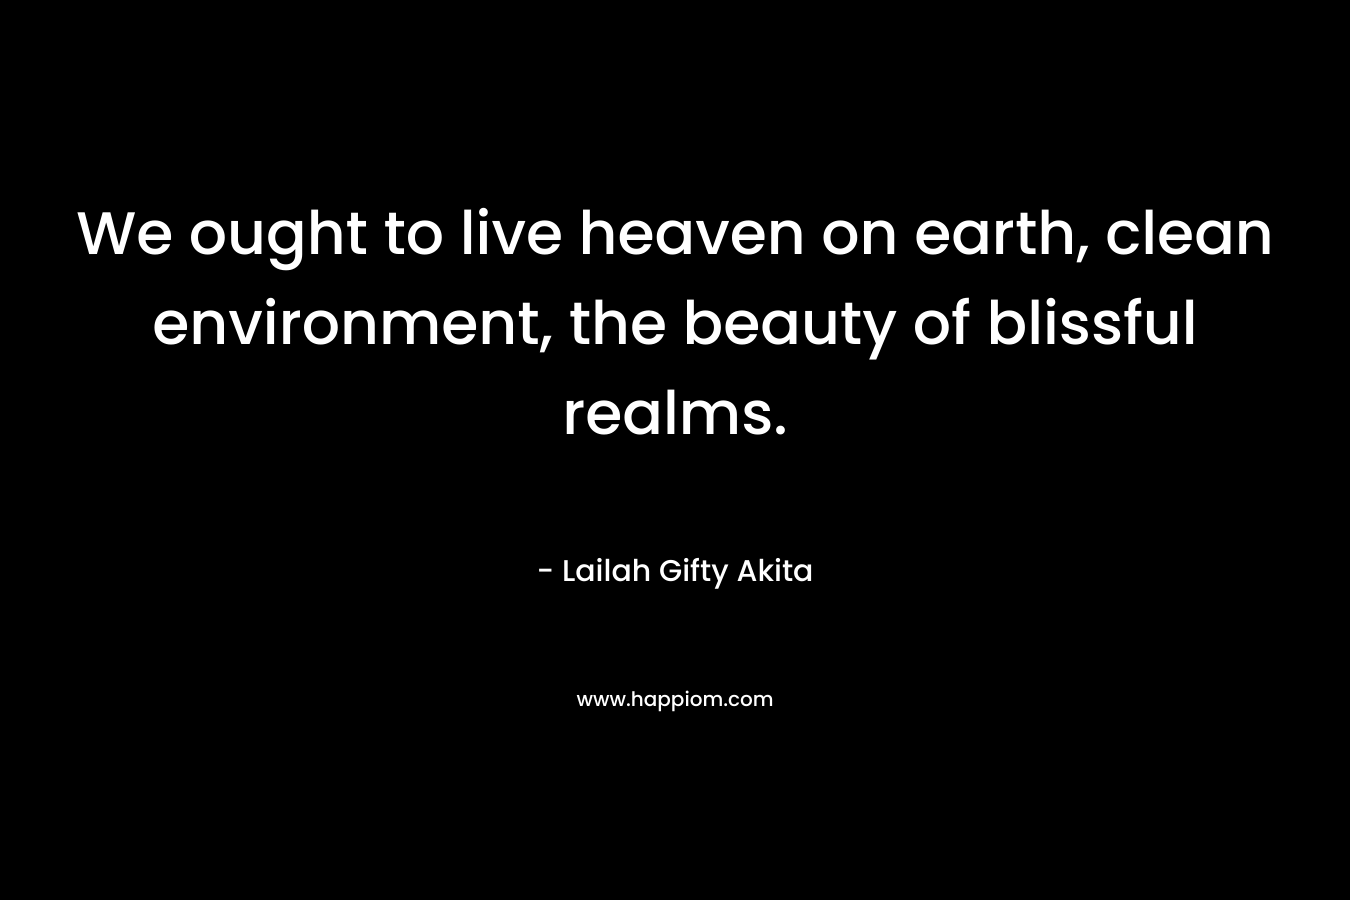 We ought to live heaven on earth, clean environment, the beauty of blissful realms. – Lailah Gifty Akita